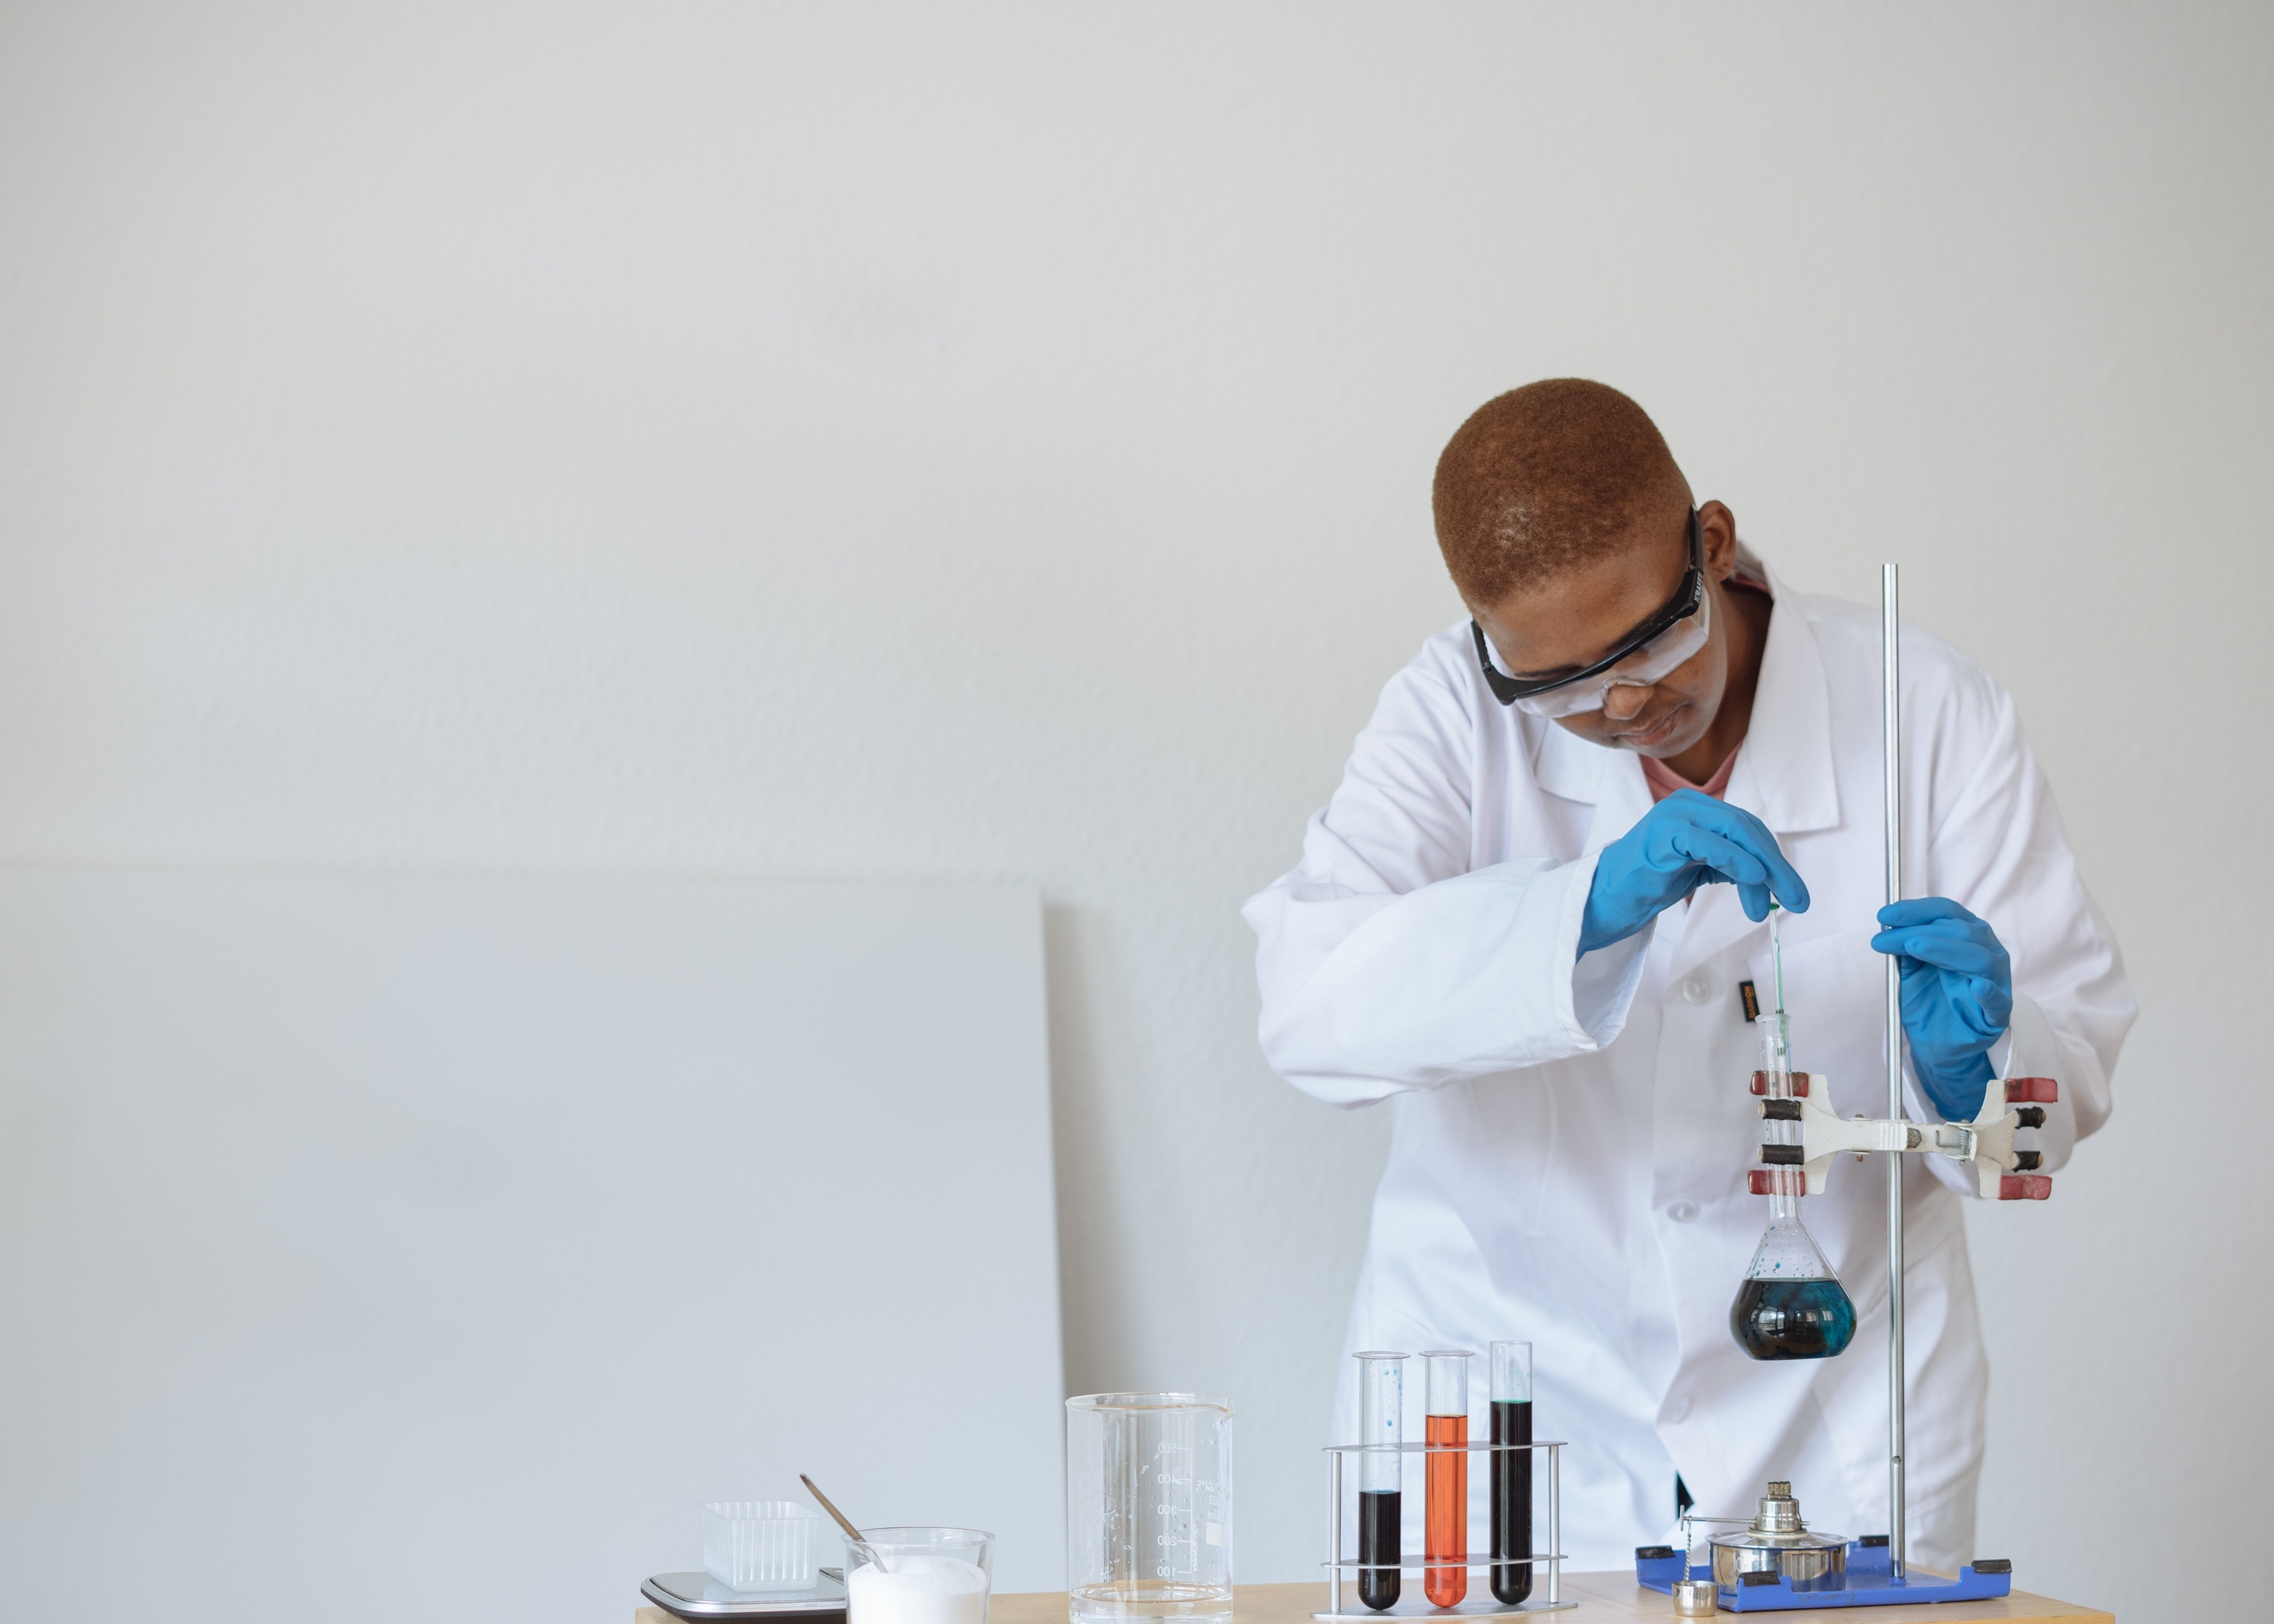 a black chemistry student running an experiment (#BlackInChem)